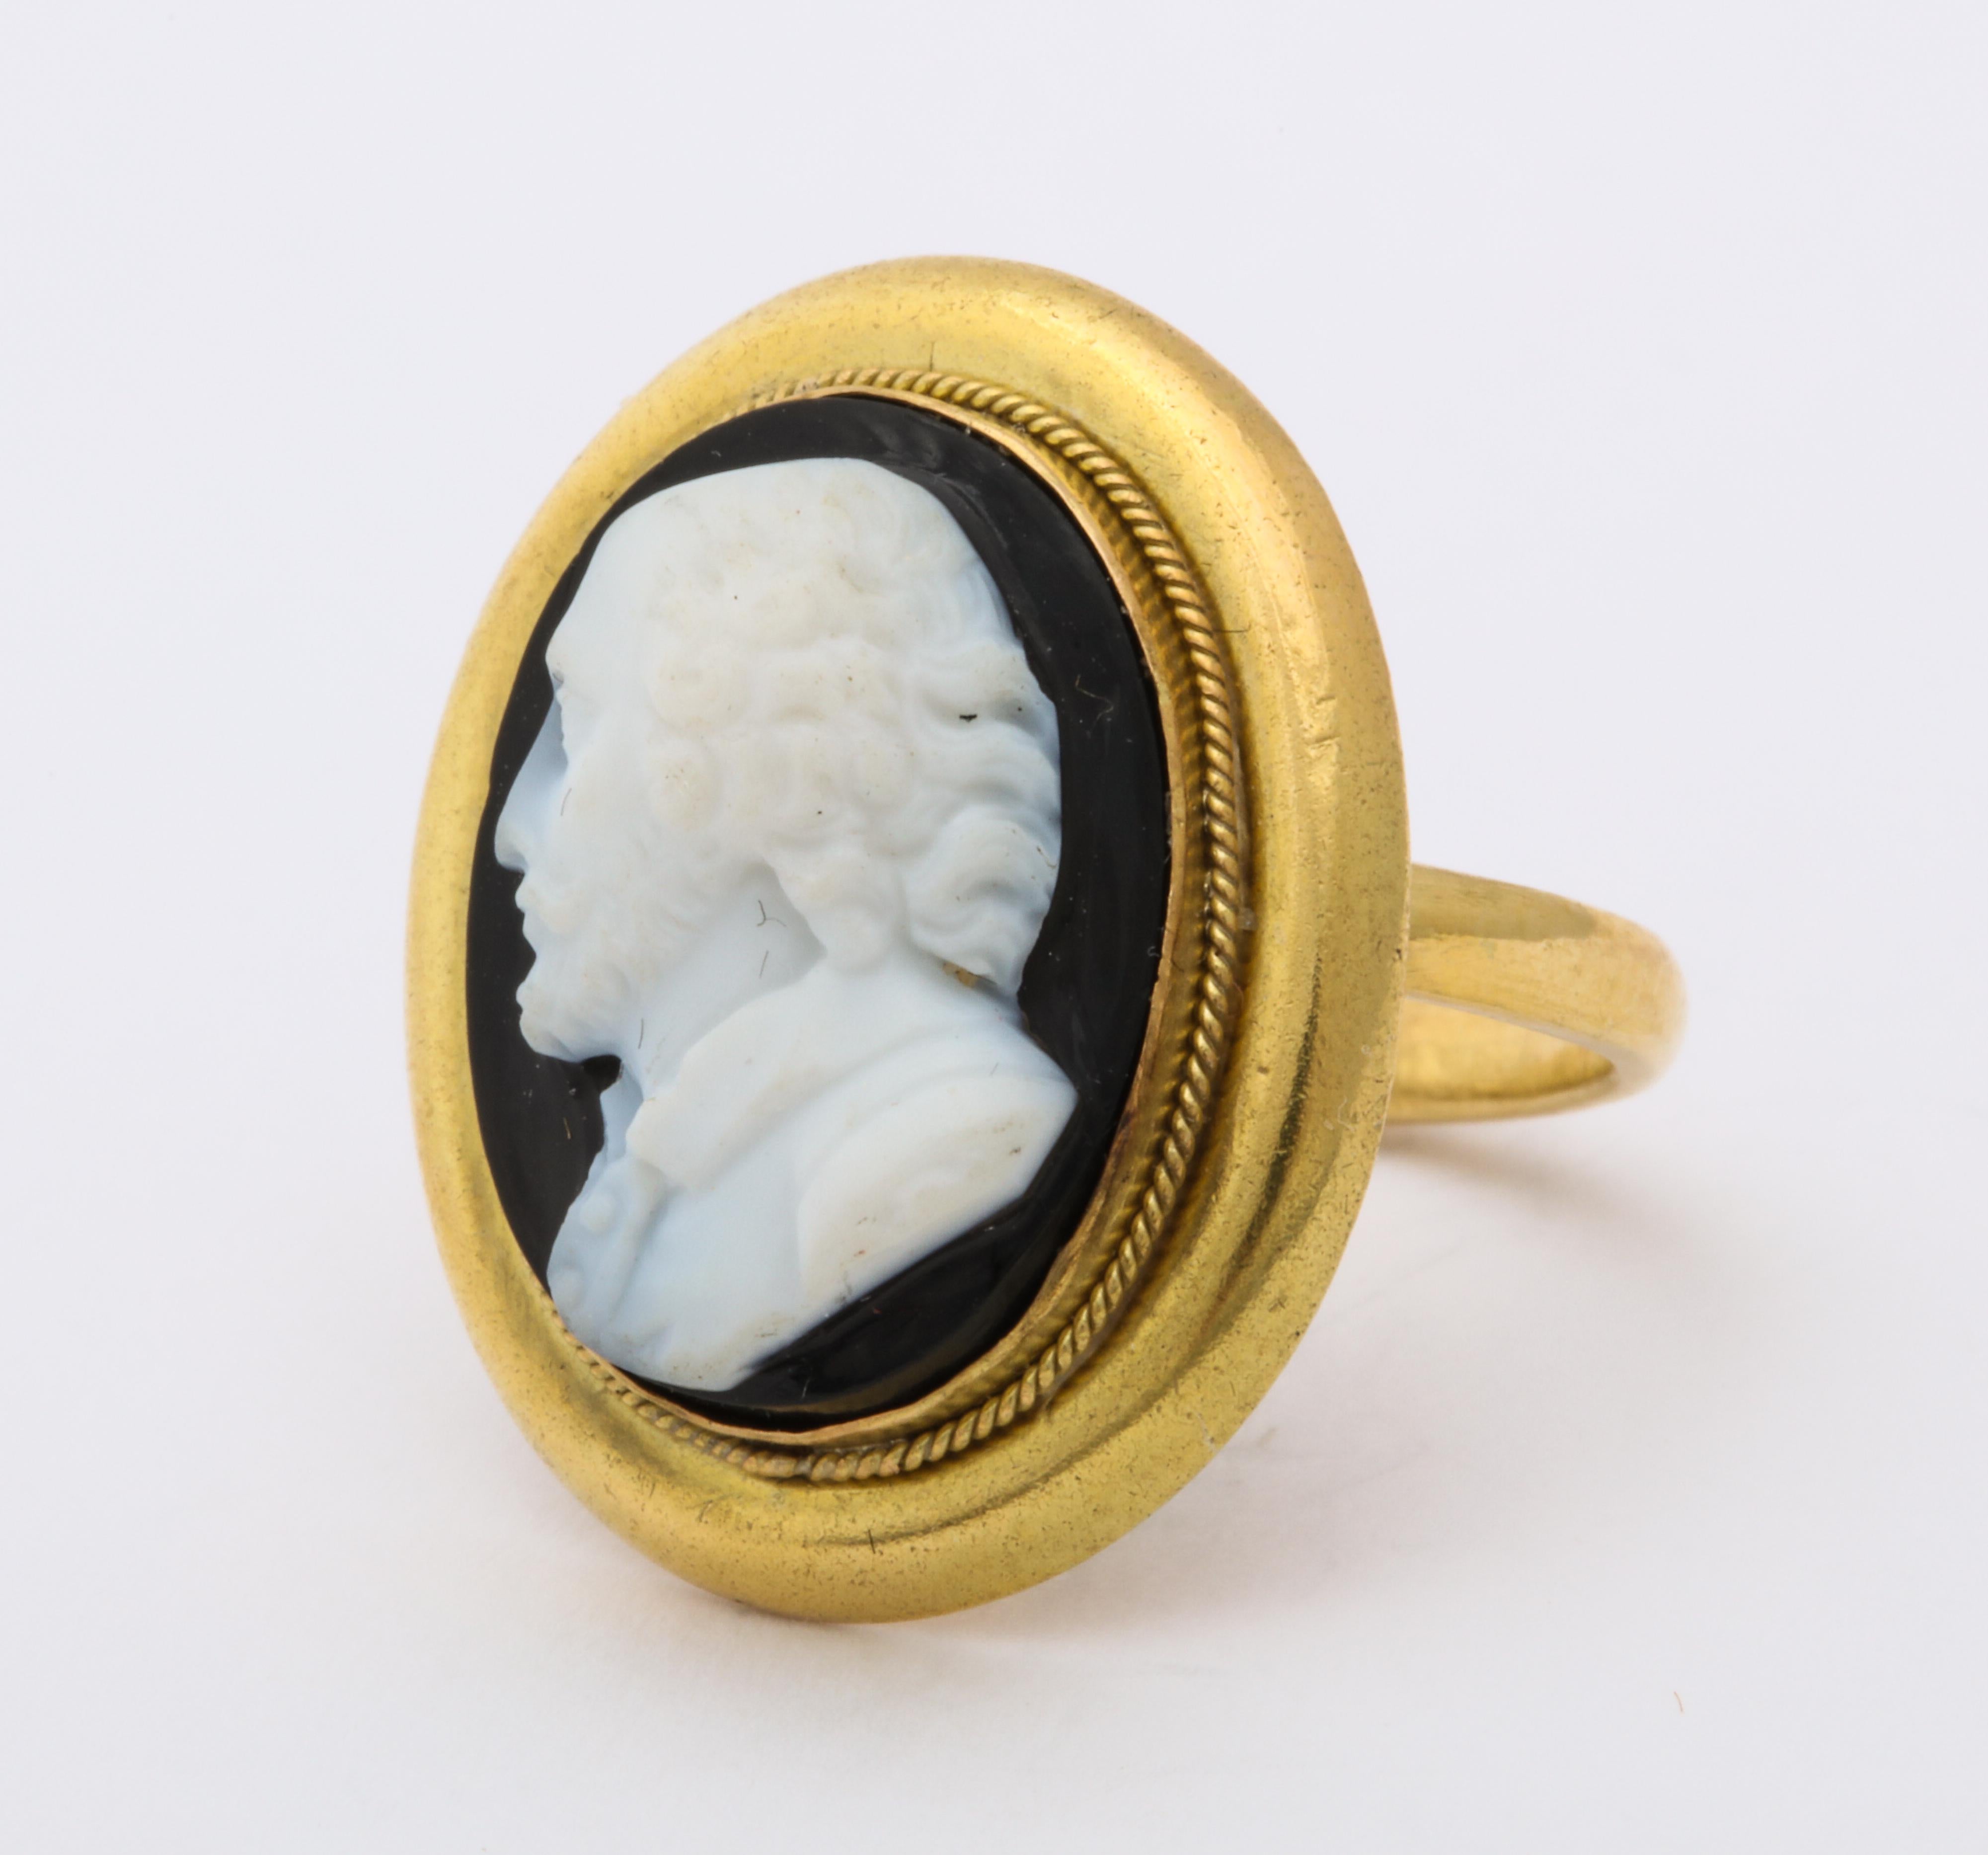 In a gentle oval of 18 kt gold rests a miniature profile of William Shakespeare wearing a buttoned shirt all carved in durable hard stone.  Imagine a black stone, banded with white, turned into a portrait by an artist who seeks enough white so that